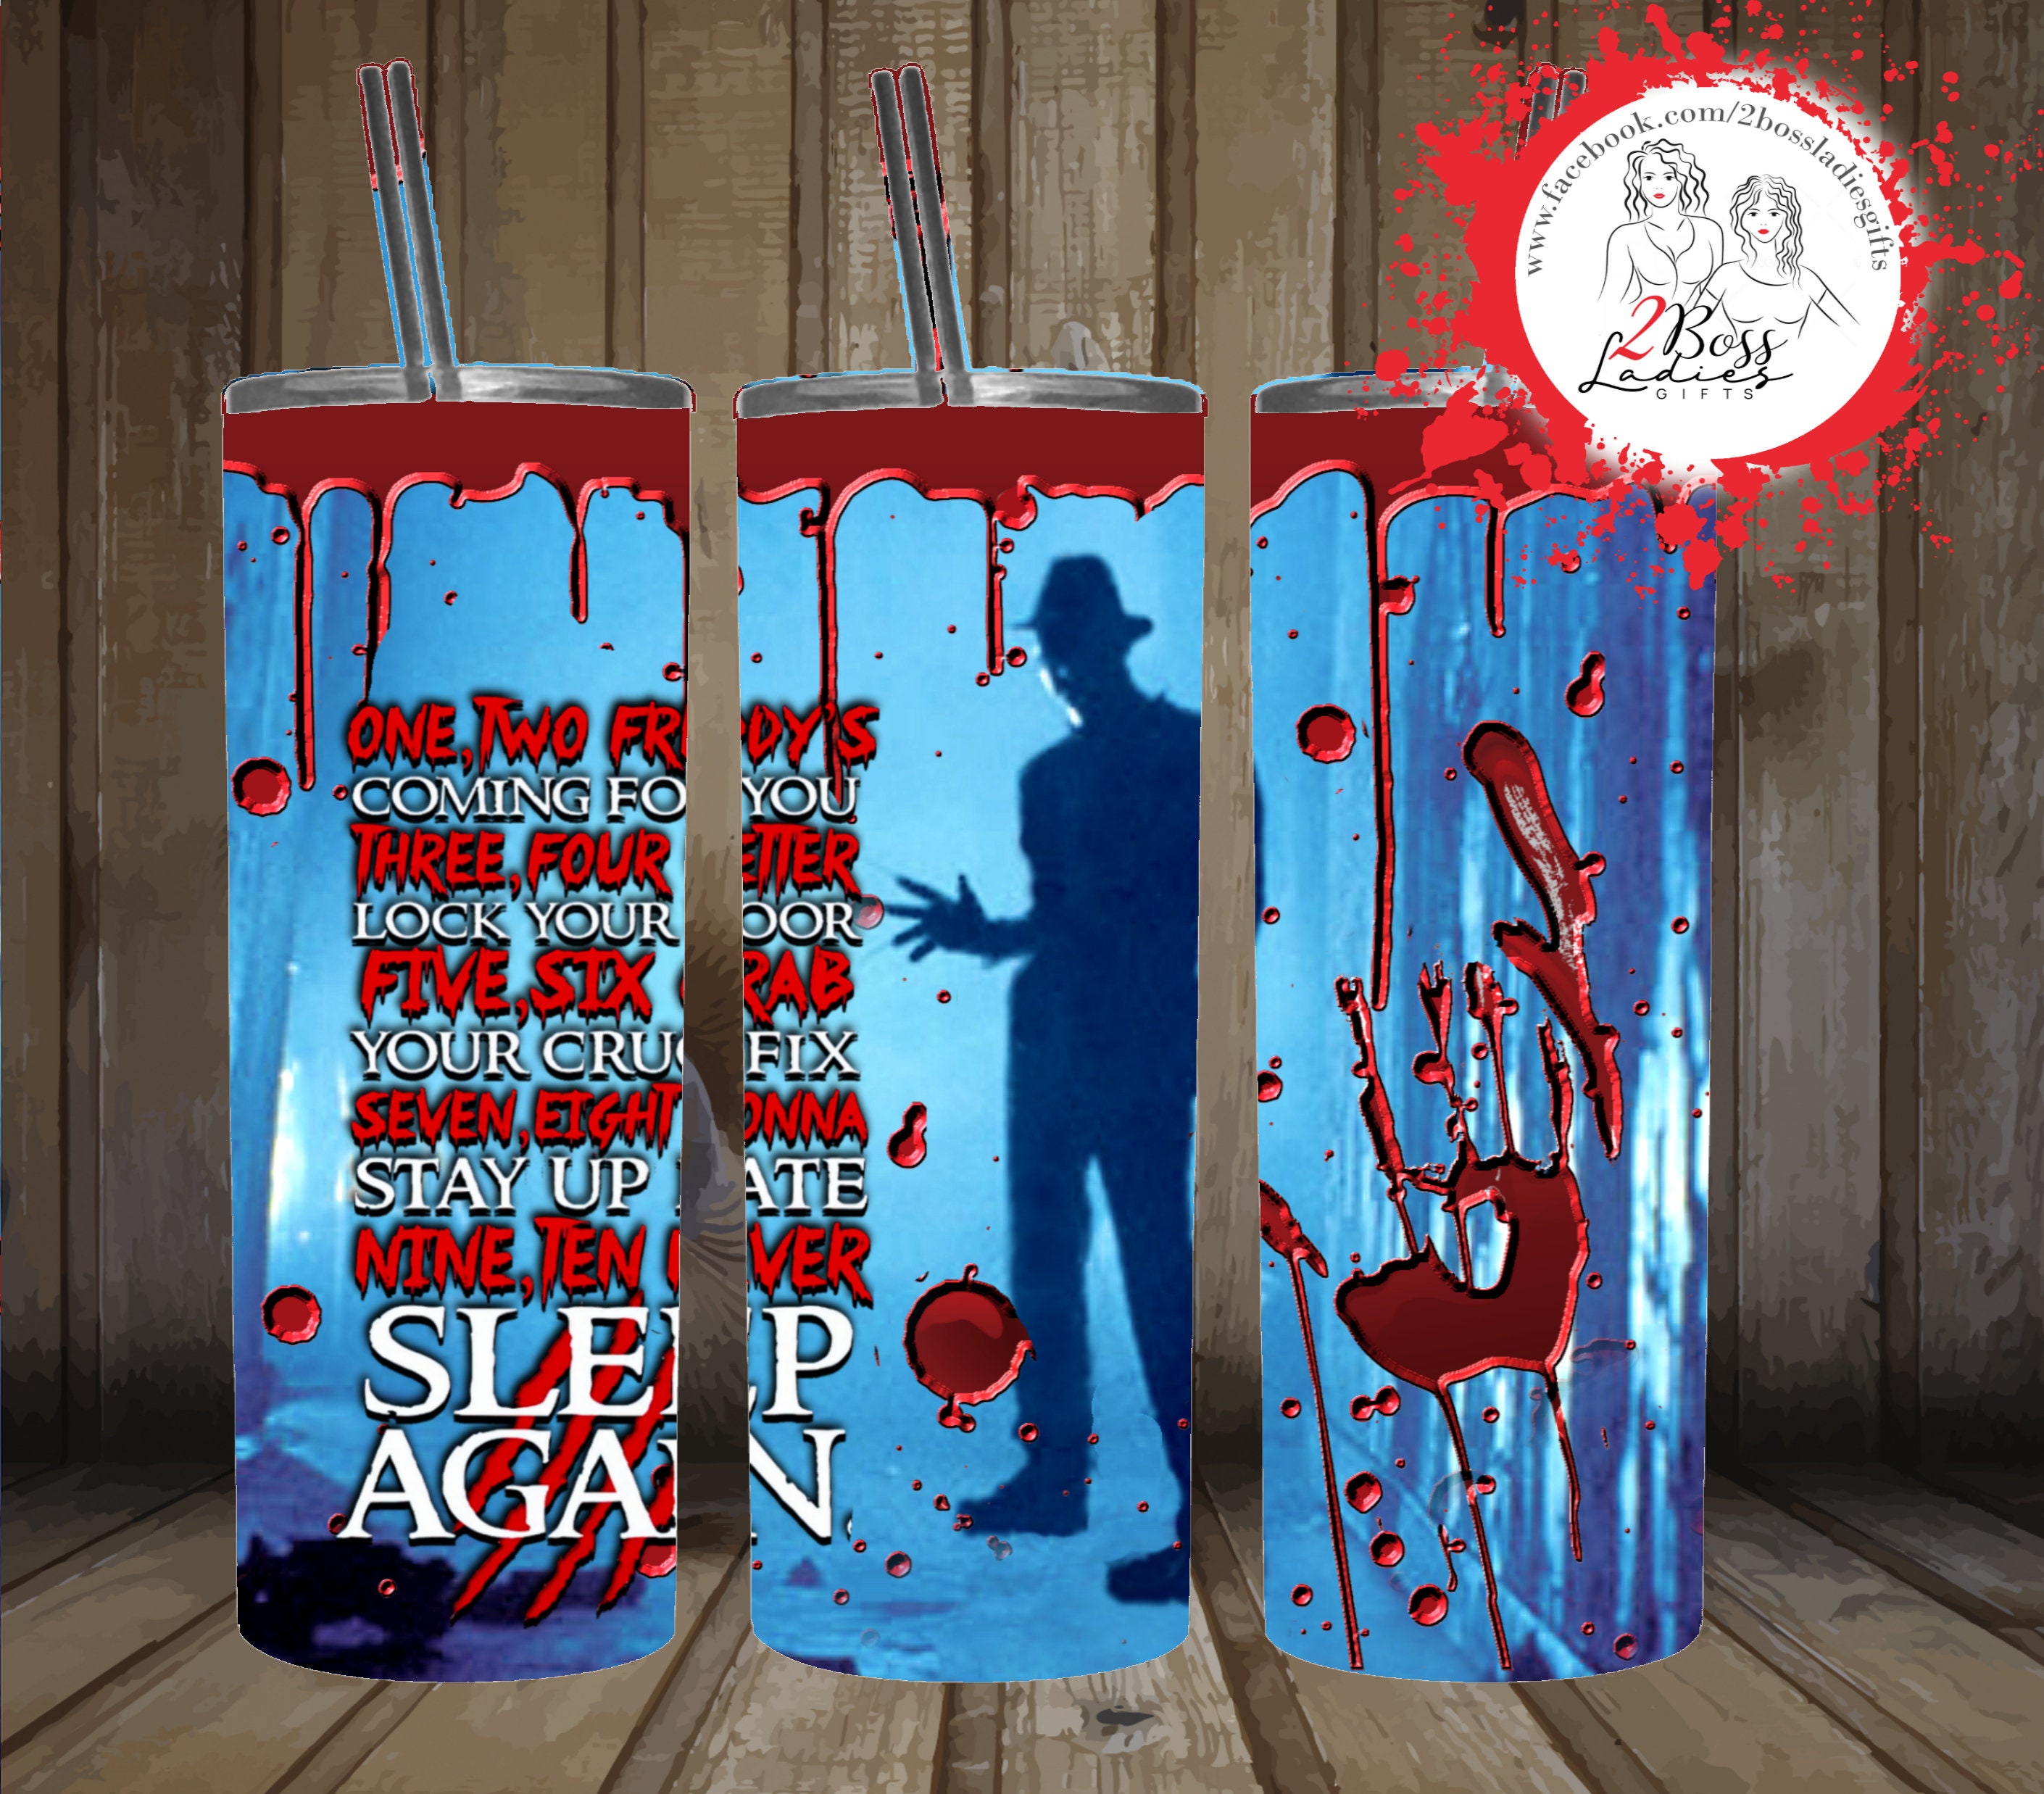 Don't) Close Your Eyes Horror Game Print Art Board Print for Sale by  CausticCryptid